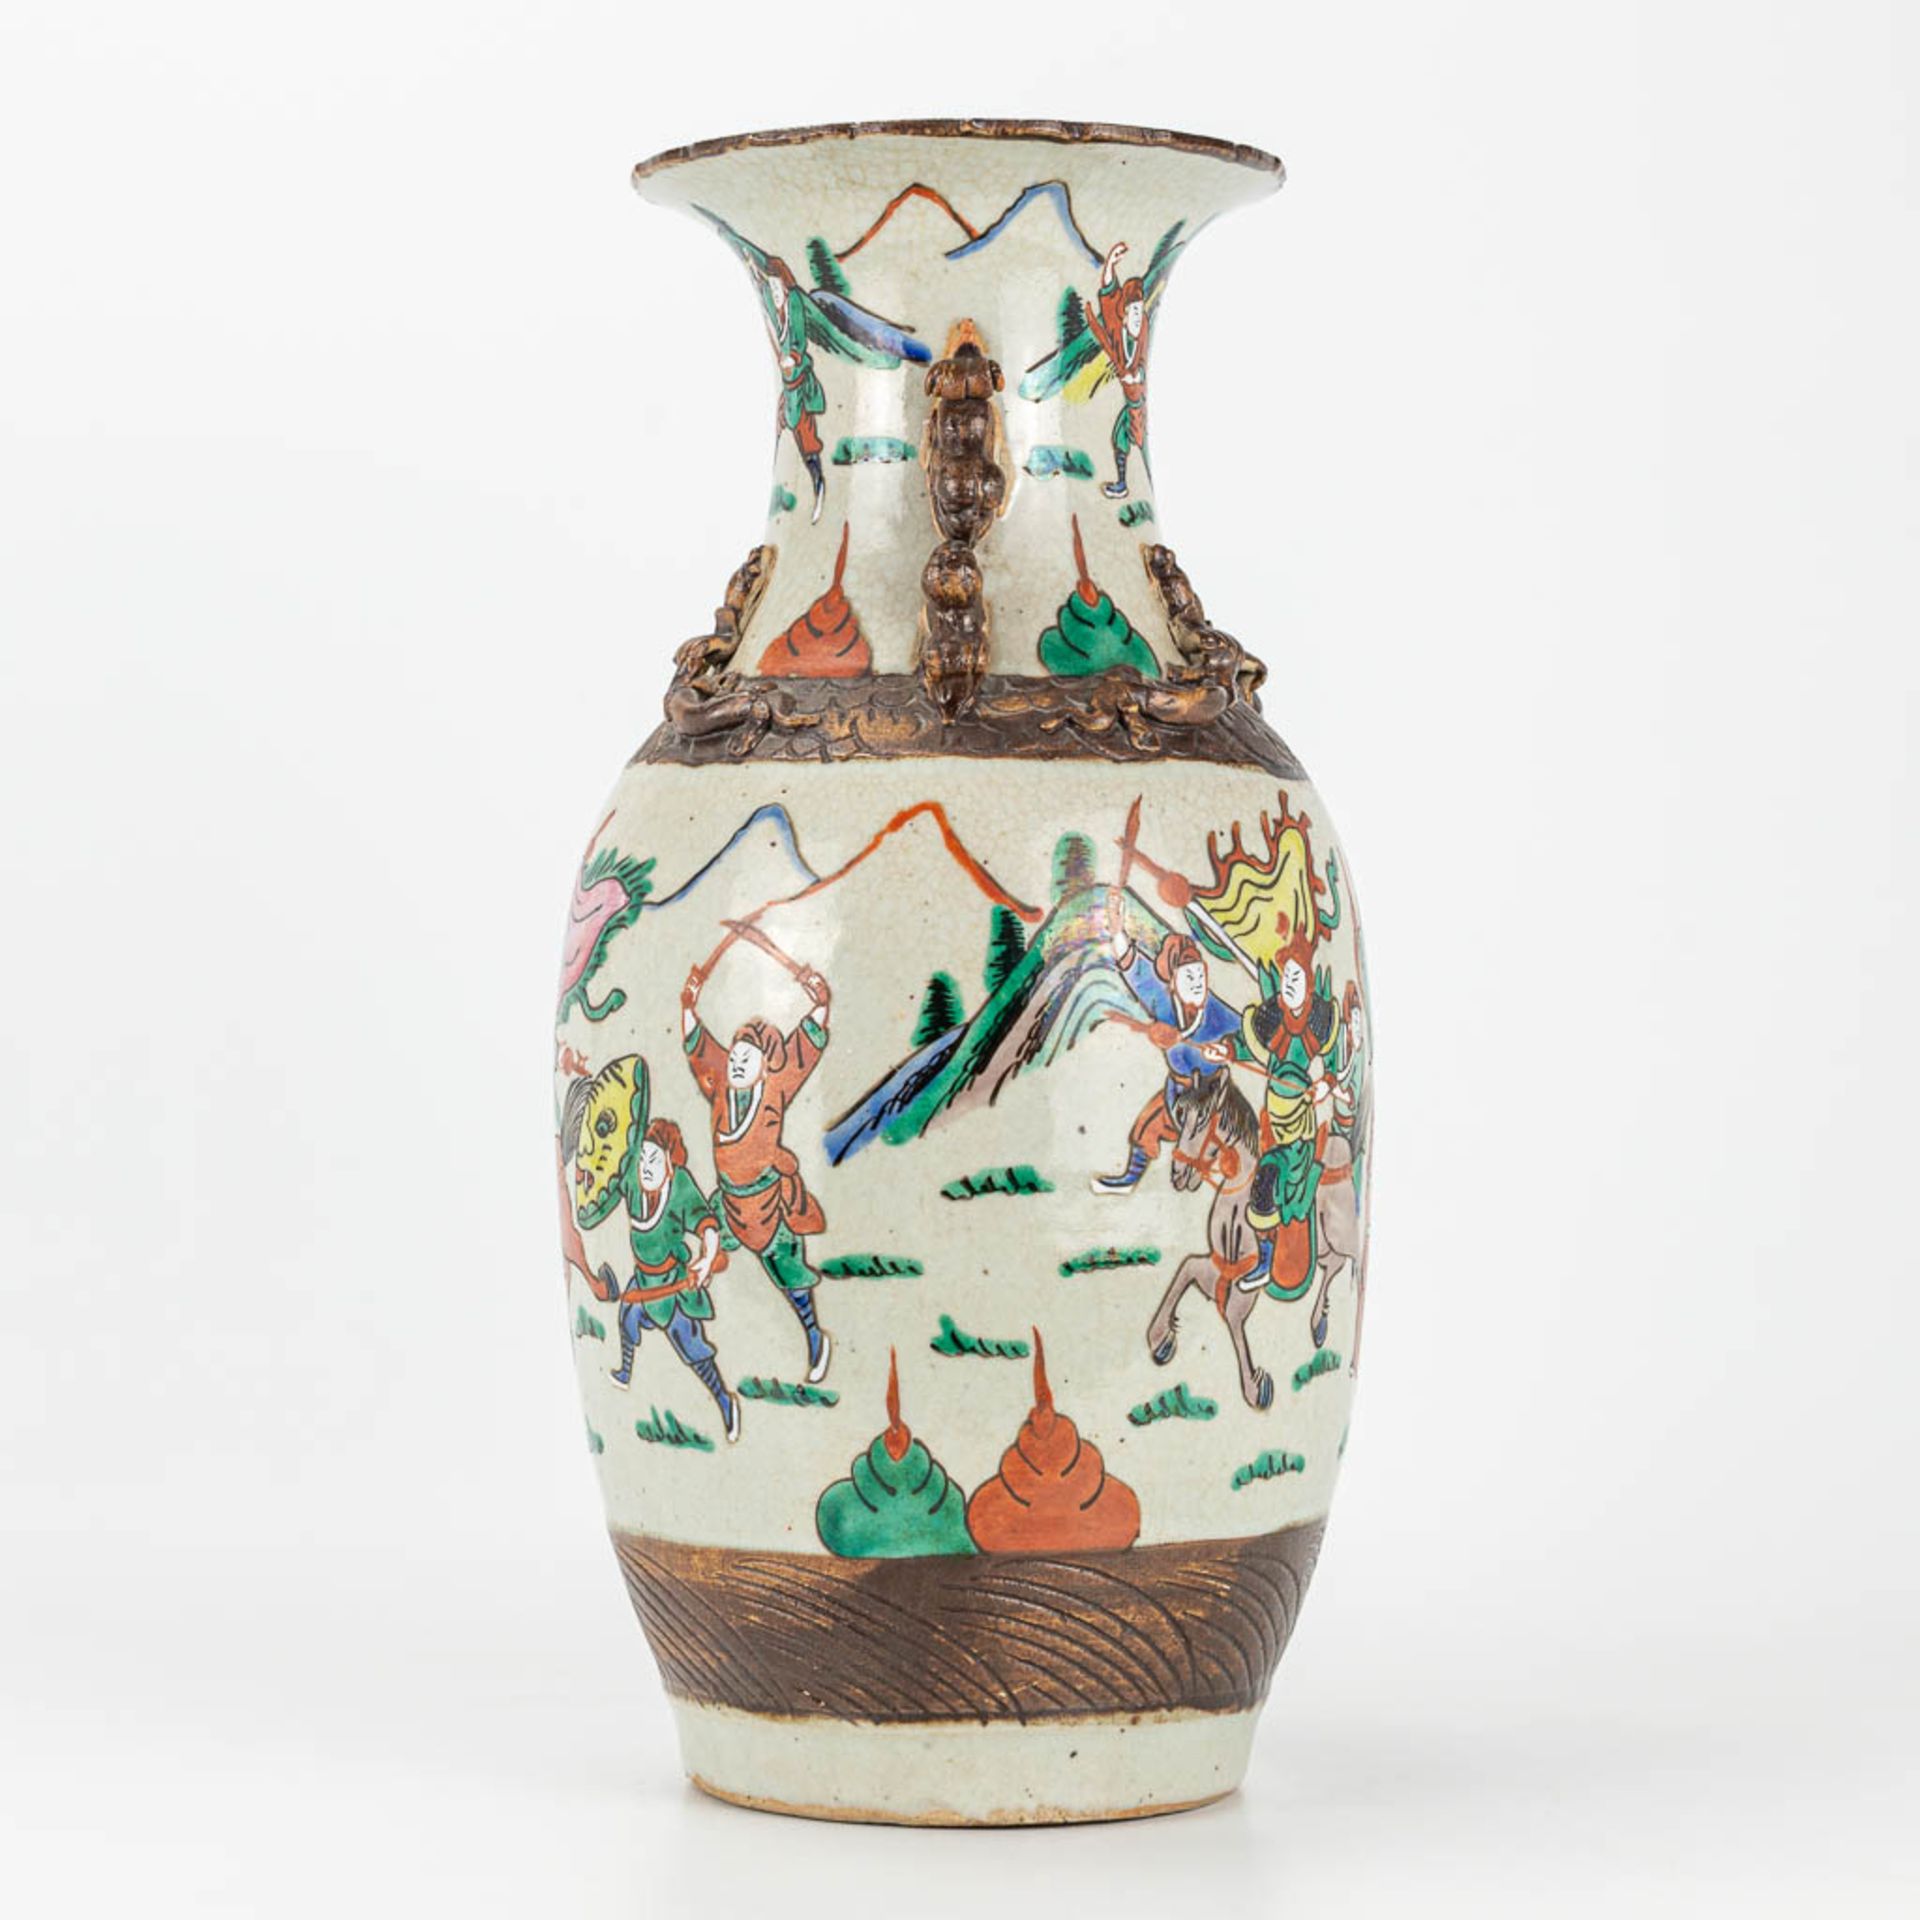 A Nanking vase made of Chinese porcleain and decorated with warriors - Image 4 of 15